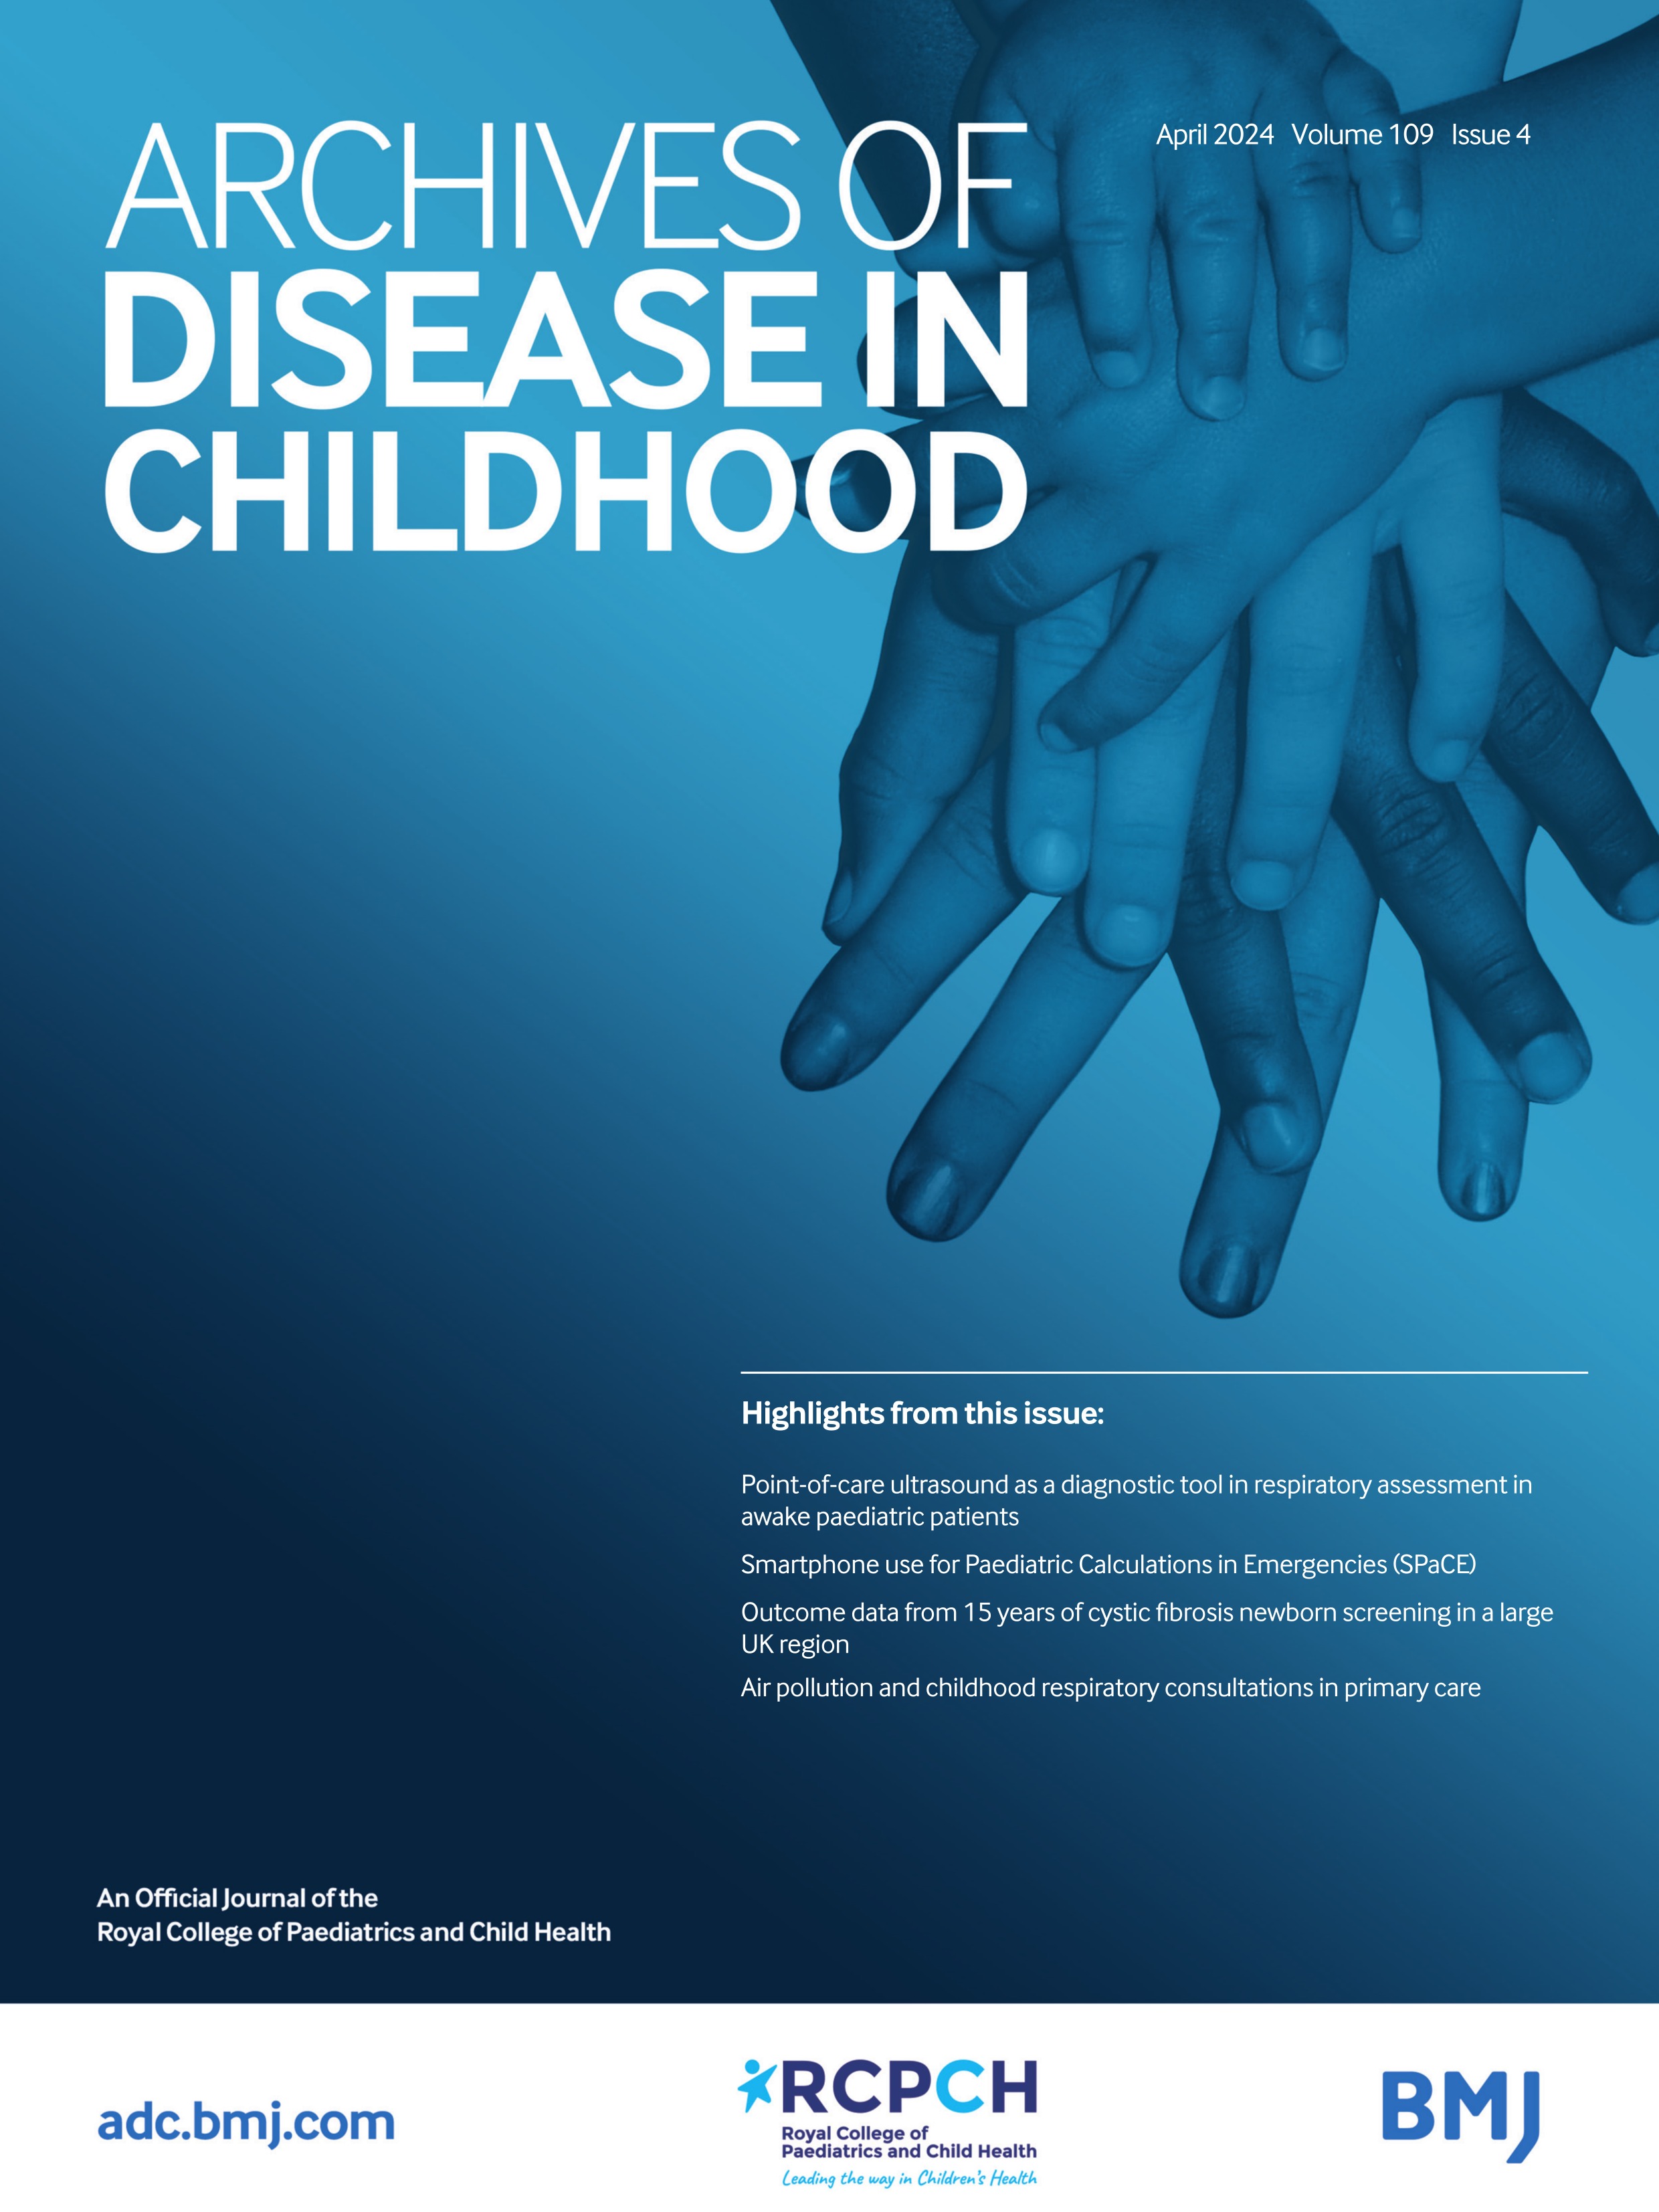 Air pollution and childhood respiratory consultations in primary care: a systematic review